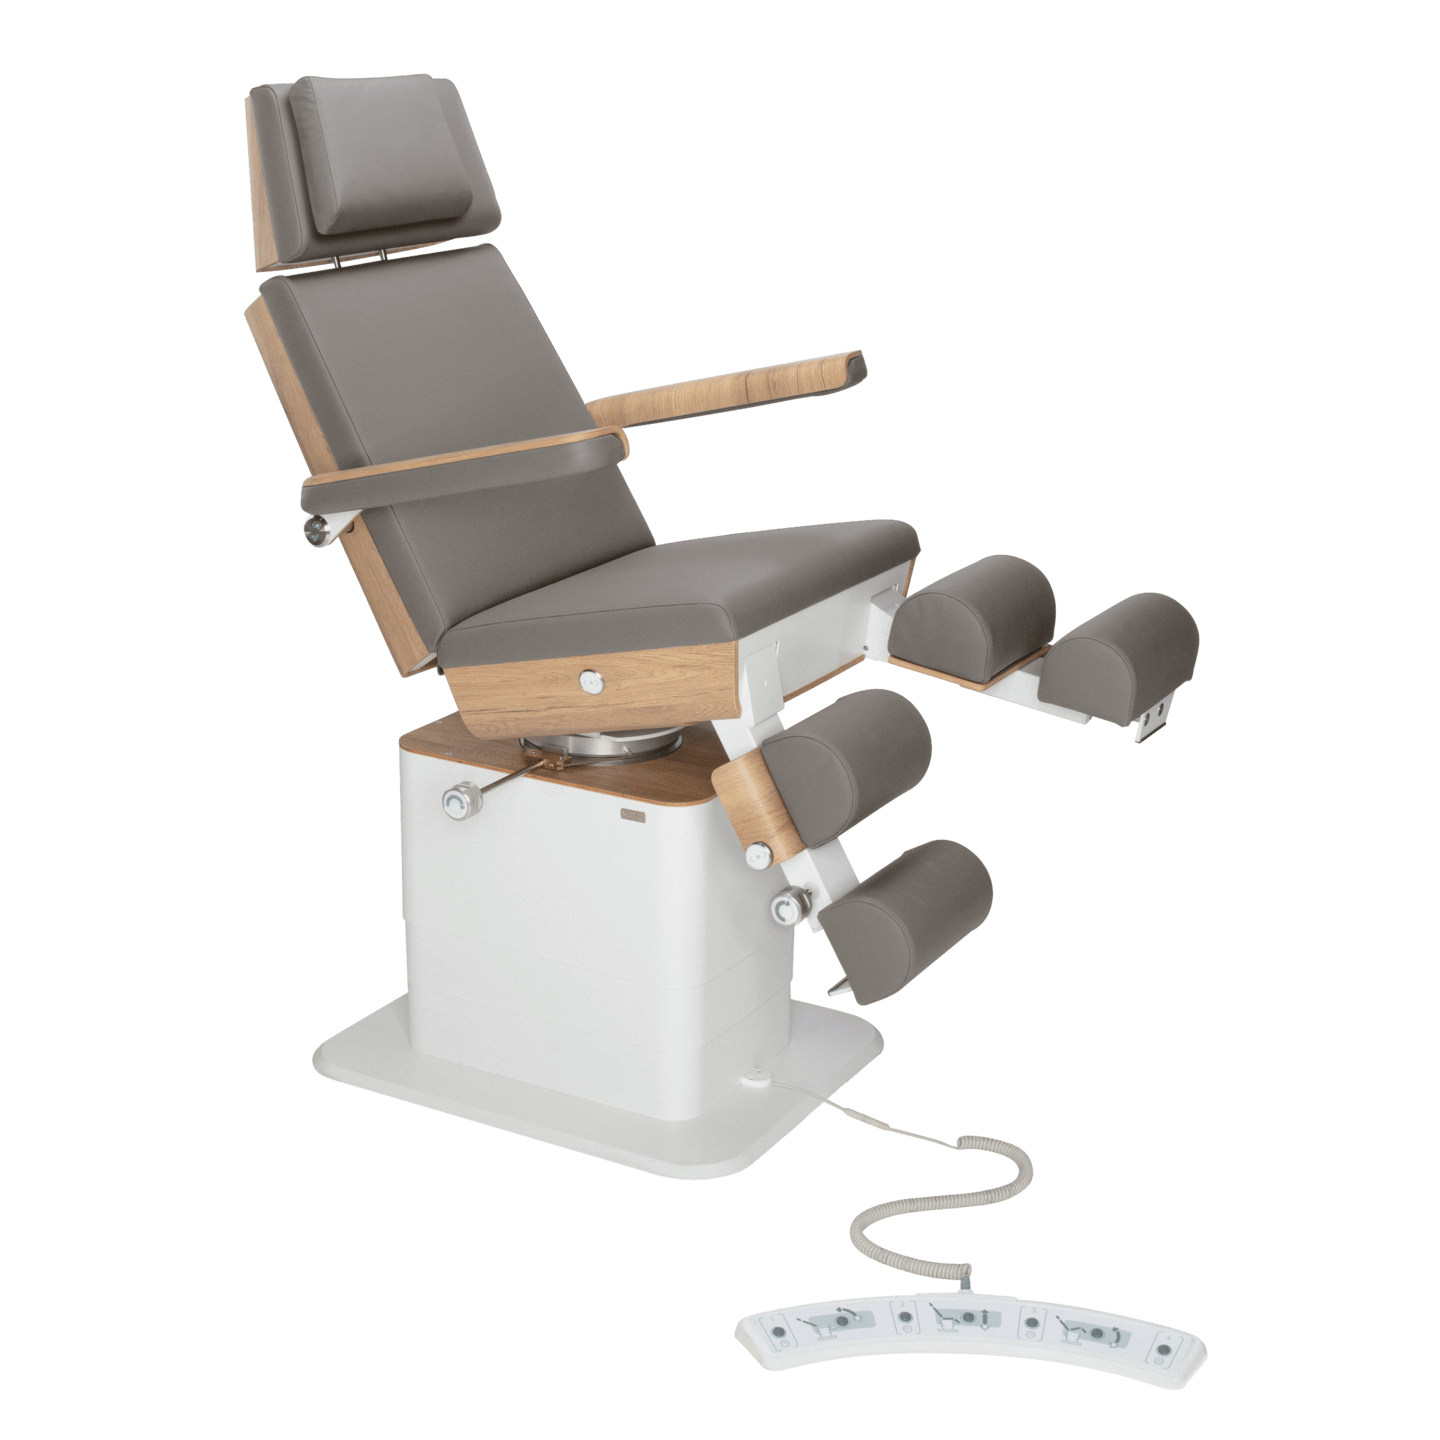 RUCK - MOON Podiatry Chair/Couch with motorised leg sections and patient control in stone